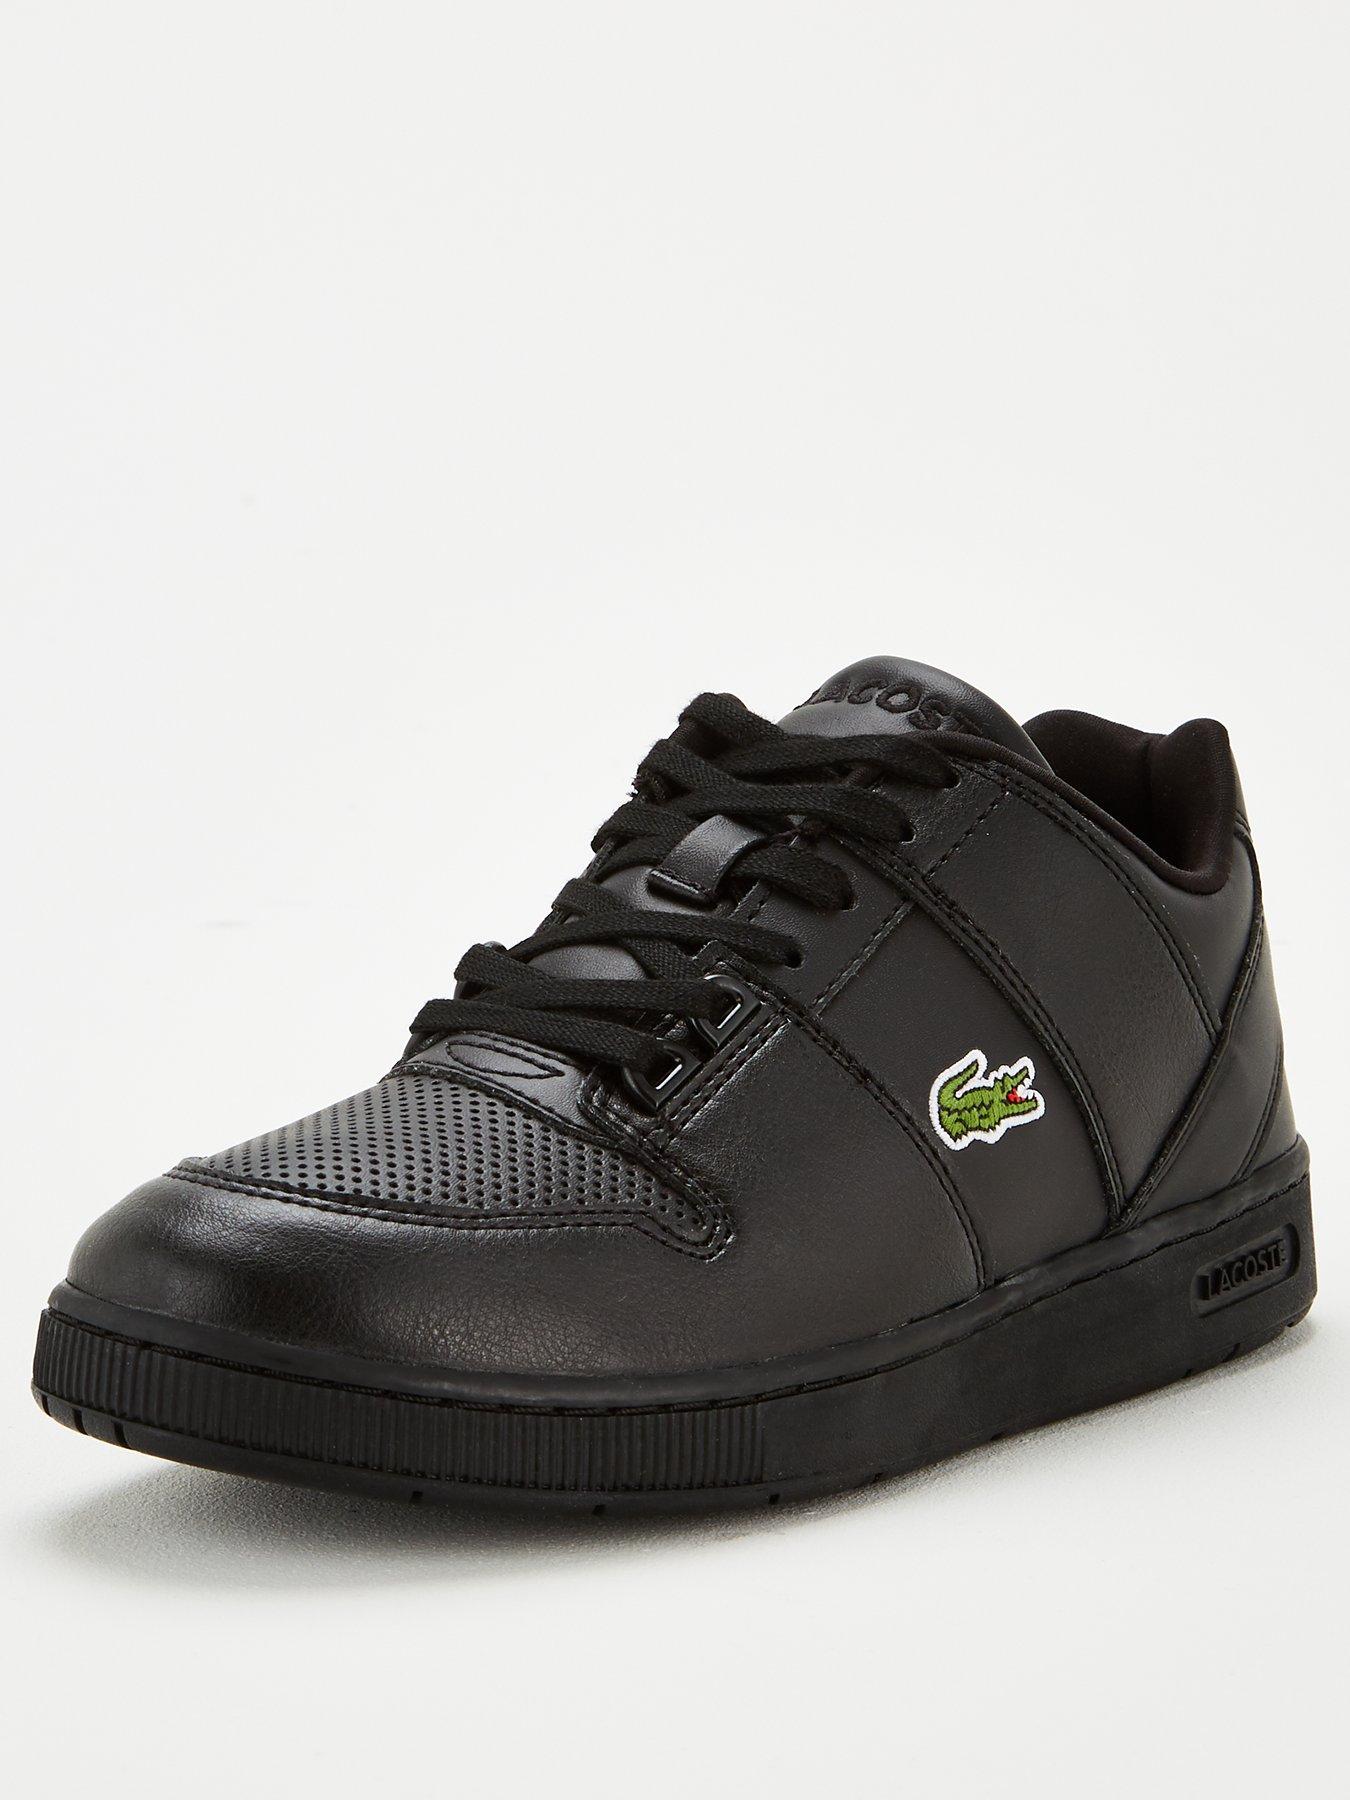 baby girl lacoste trainers